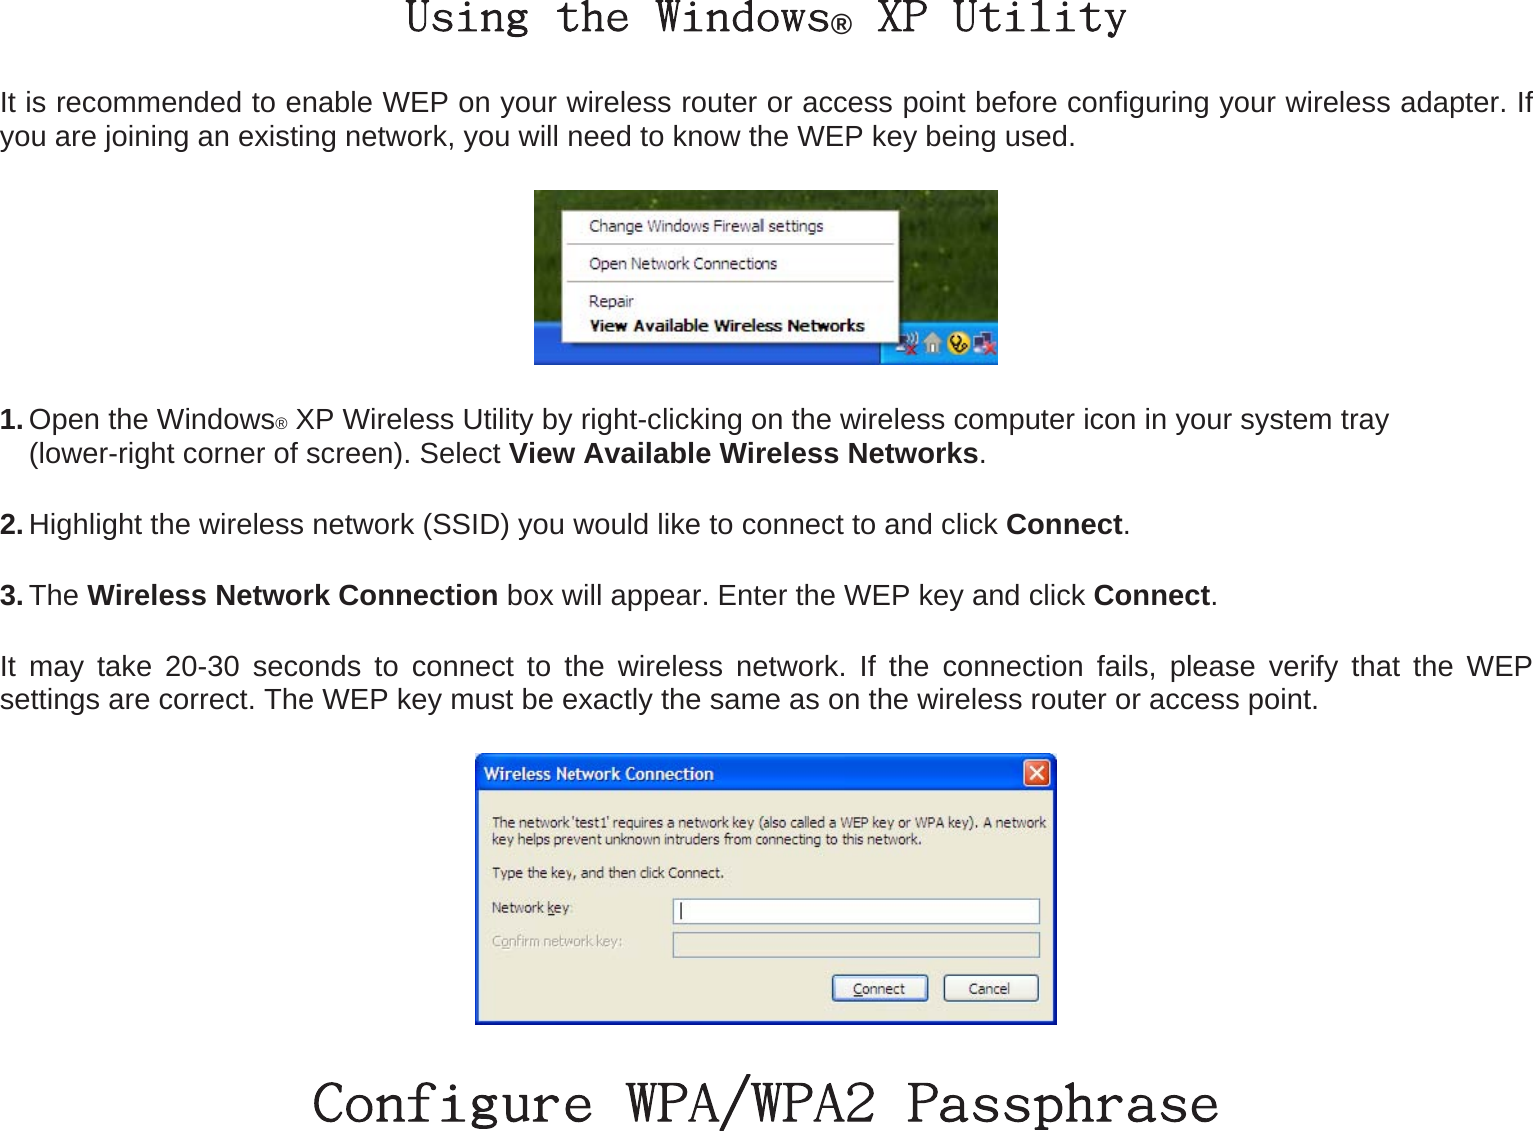 Using the Windows® XP Utility It is recommended to enable WEP on your wireless router or access point before configuring your wireless adapter. If you are joining an existing network, you will need to know the WEP key being used.  1. Open the Windows® XP Wireless Utility by right-clicking on the wireless computer icon in your system tray   (lower-right corner of screen). Select View Available Wireless Networks.  2. Highlight the wireless network (SSID) you would like to connect to and click Connect. 3. The Wireless Network Connection box will appear. Enter the WEP key and click Connect. It may take 20-30 seconds to connect to the wireless network. If the connection fails, please verify that the WEP settings are correct. The WEP key must be exactly the same as on the wireless router or access point.  Configure WPA/WPA2 Passphrase 